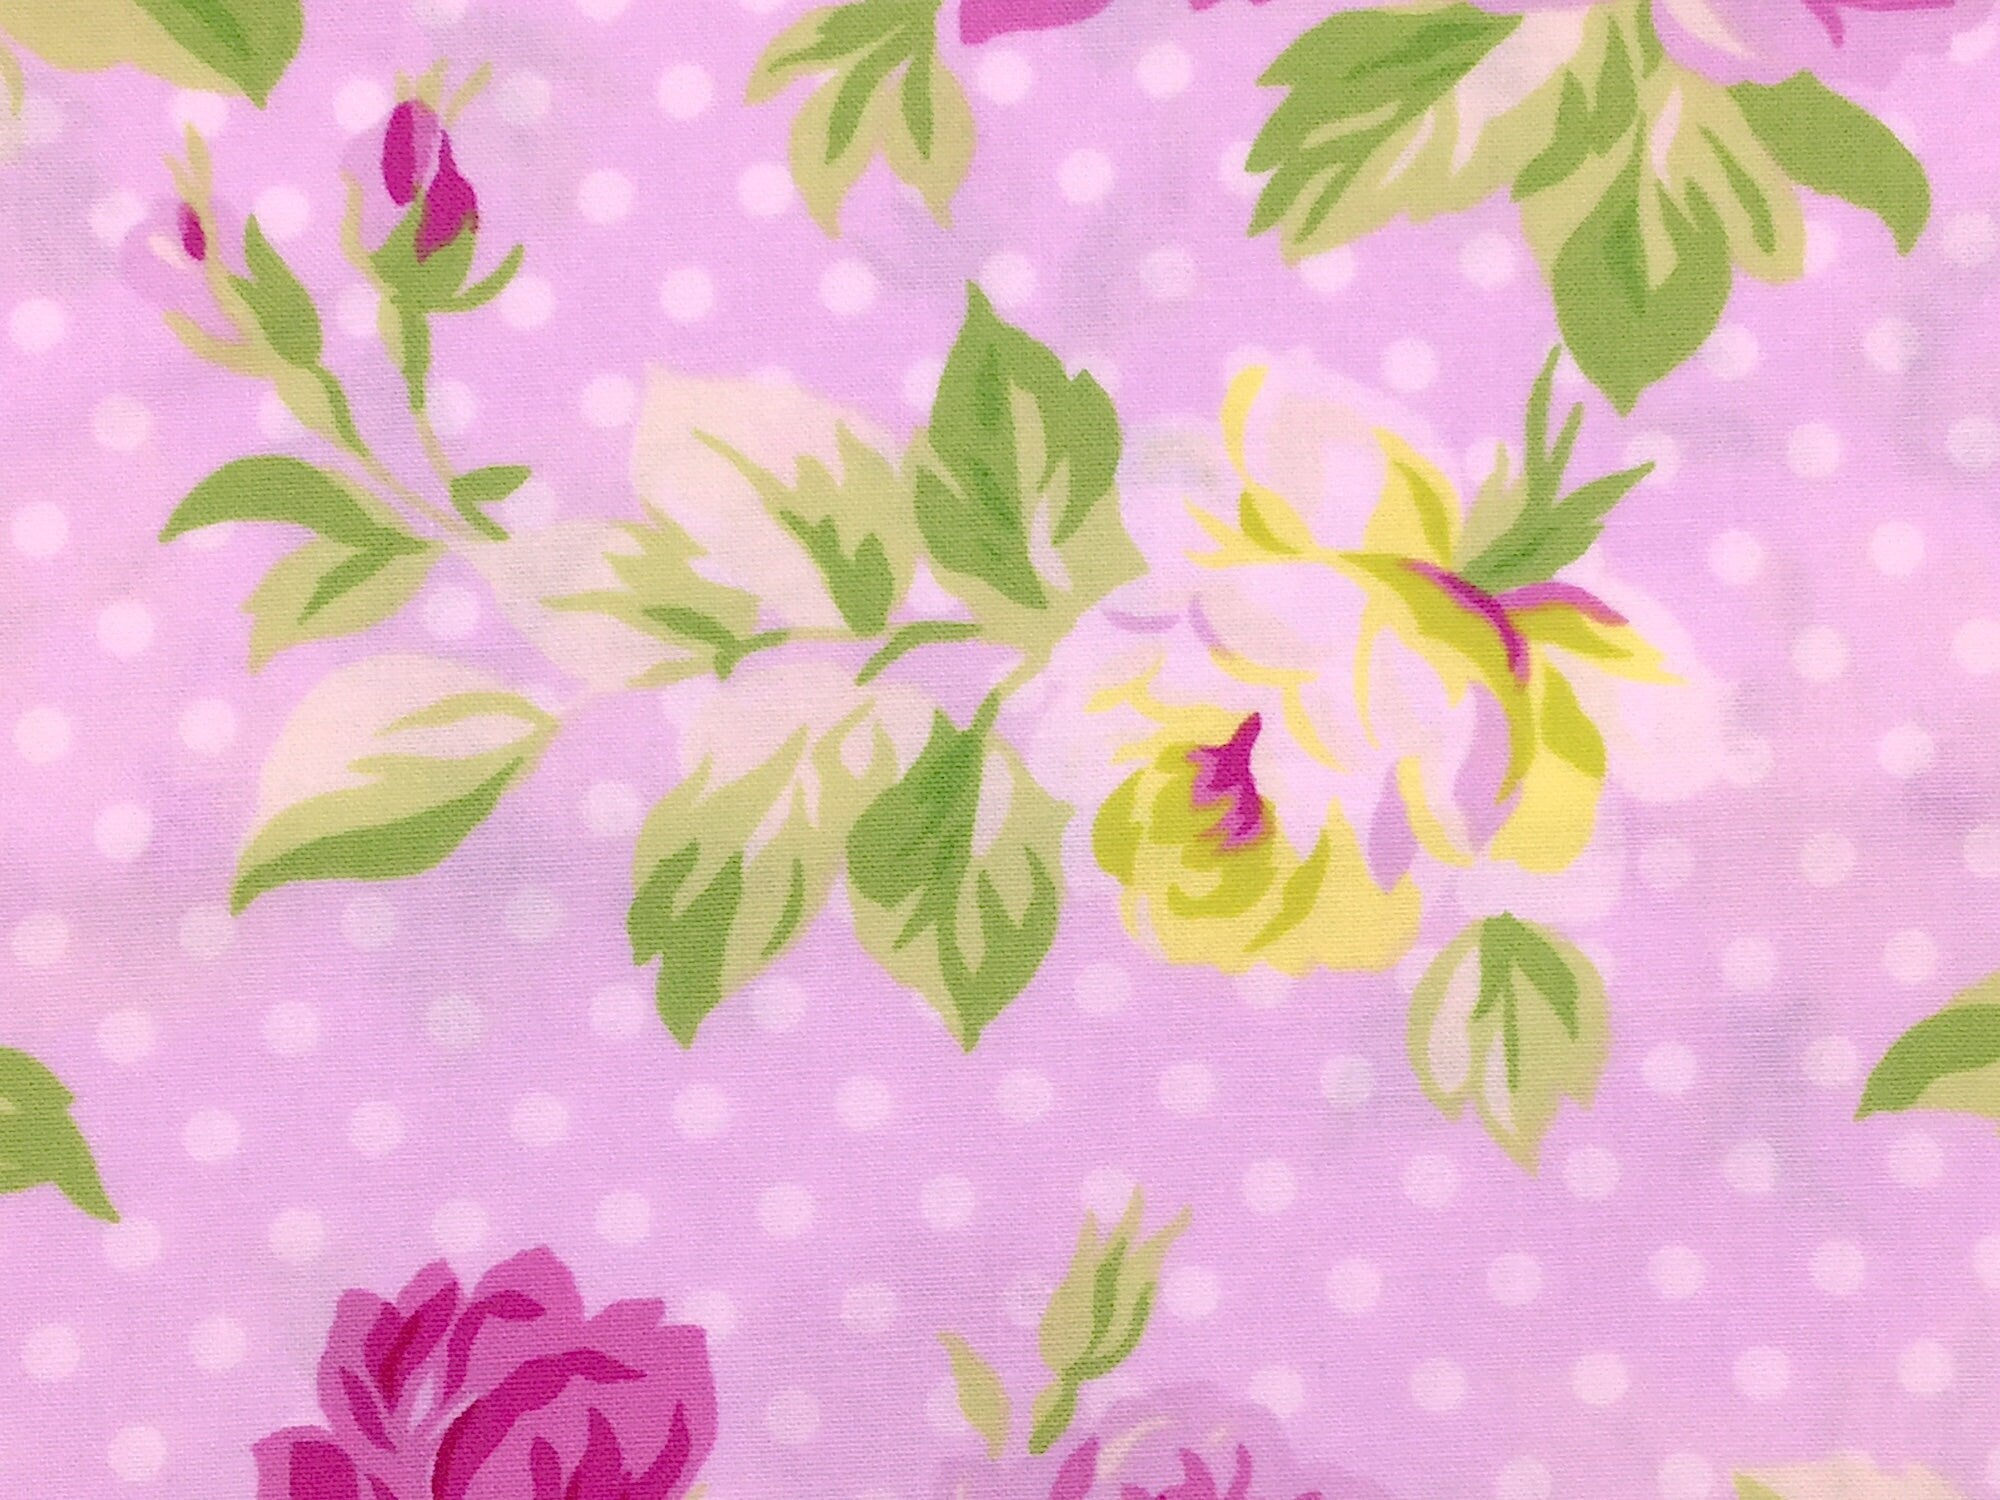 Close up of roses and leaves on a pink background.